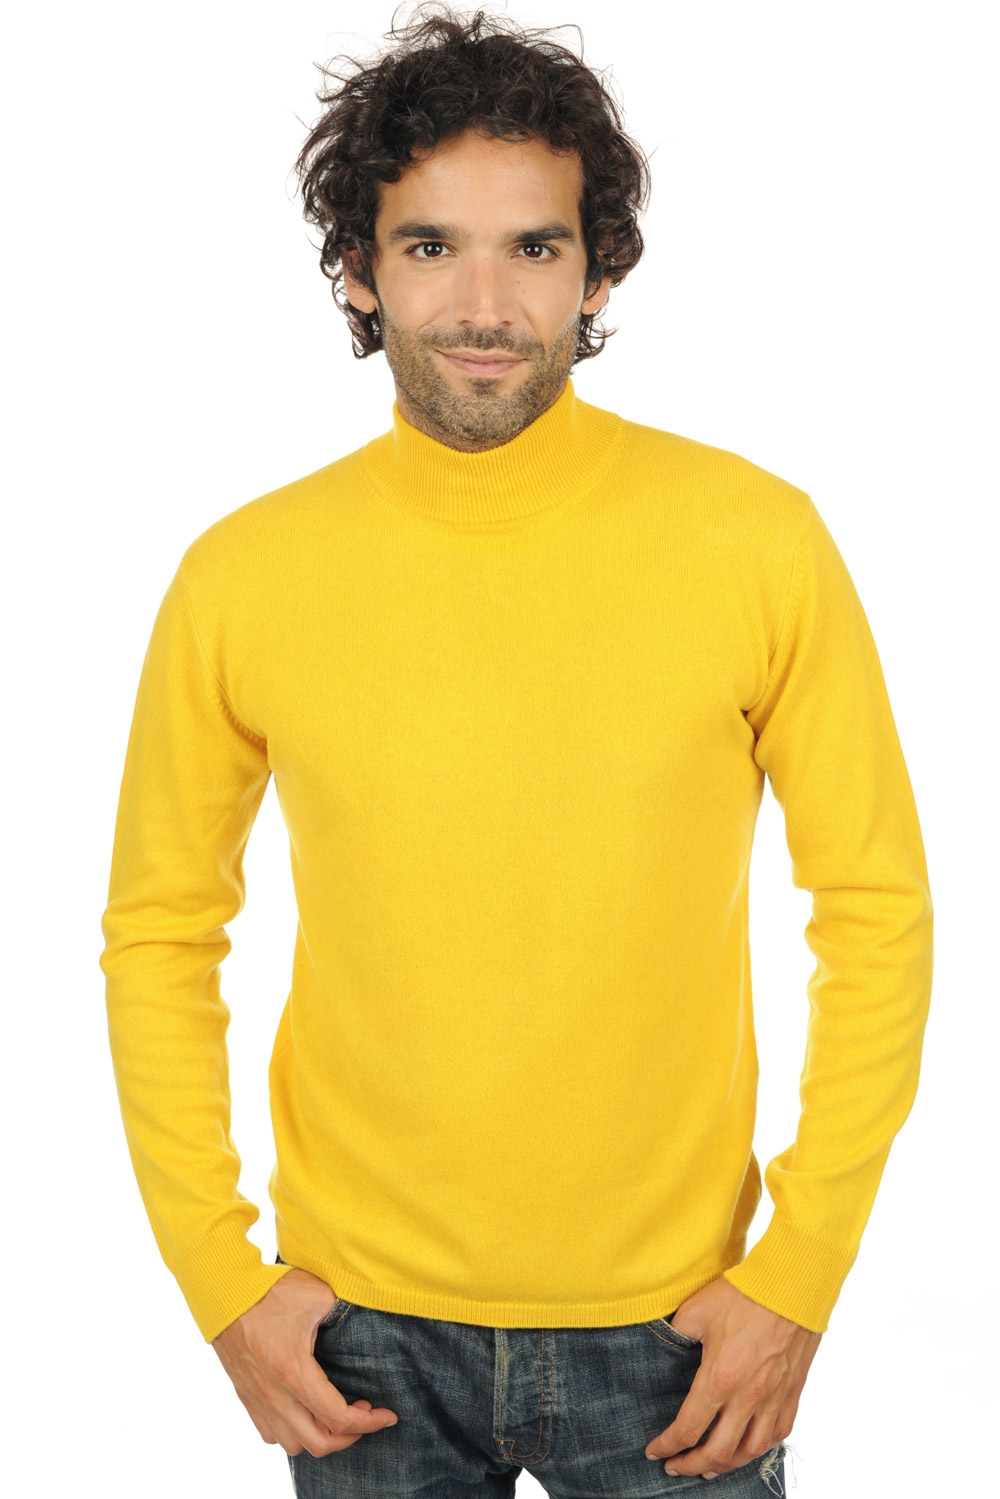 Cashmere men roll neck frederic cyber yellow 4xl